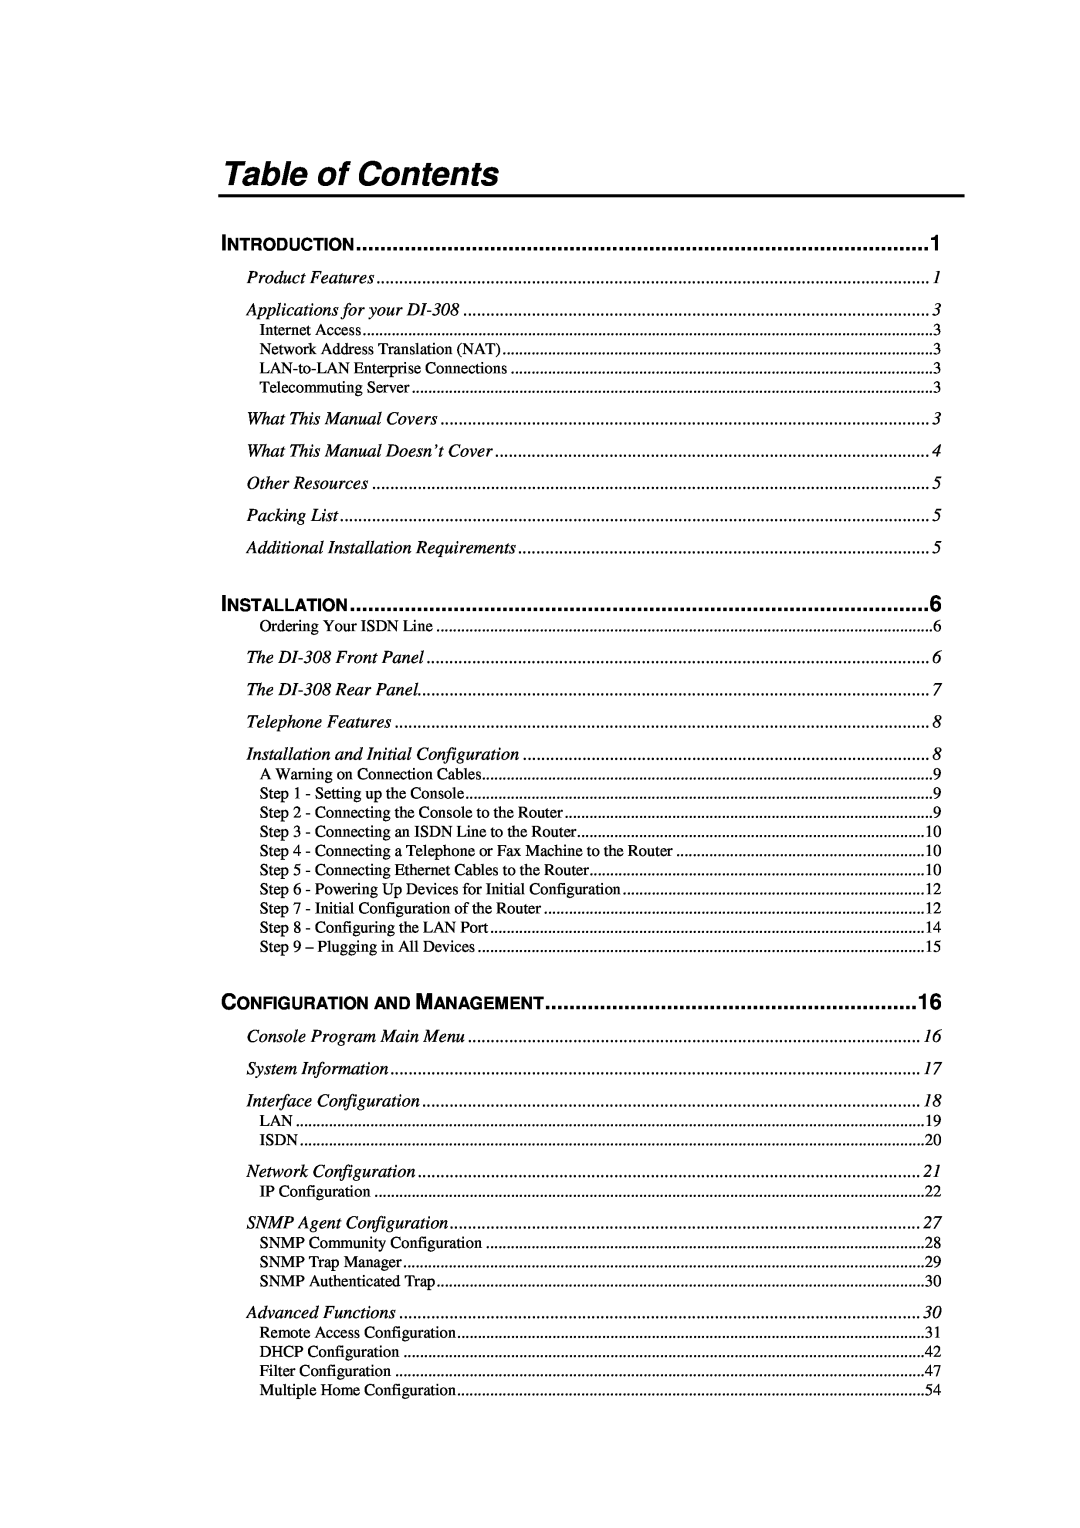 D-Link DI-308 manual Table of Contents, Introduction, Installation, Configuration And Management 